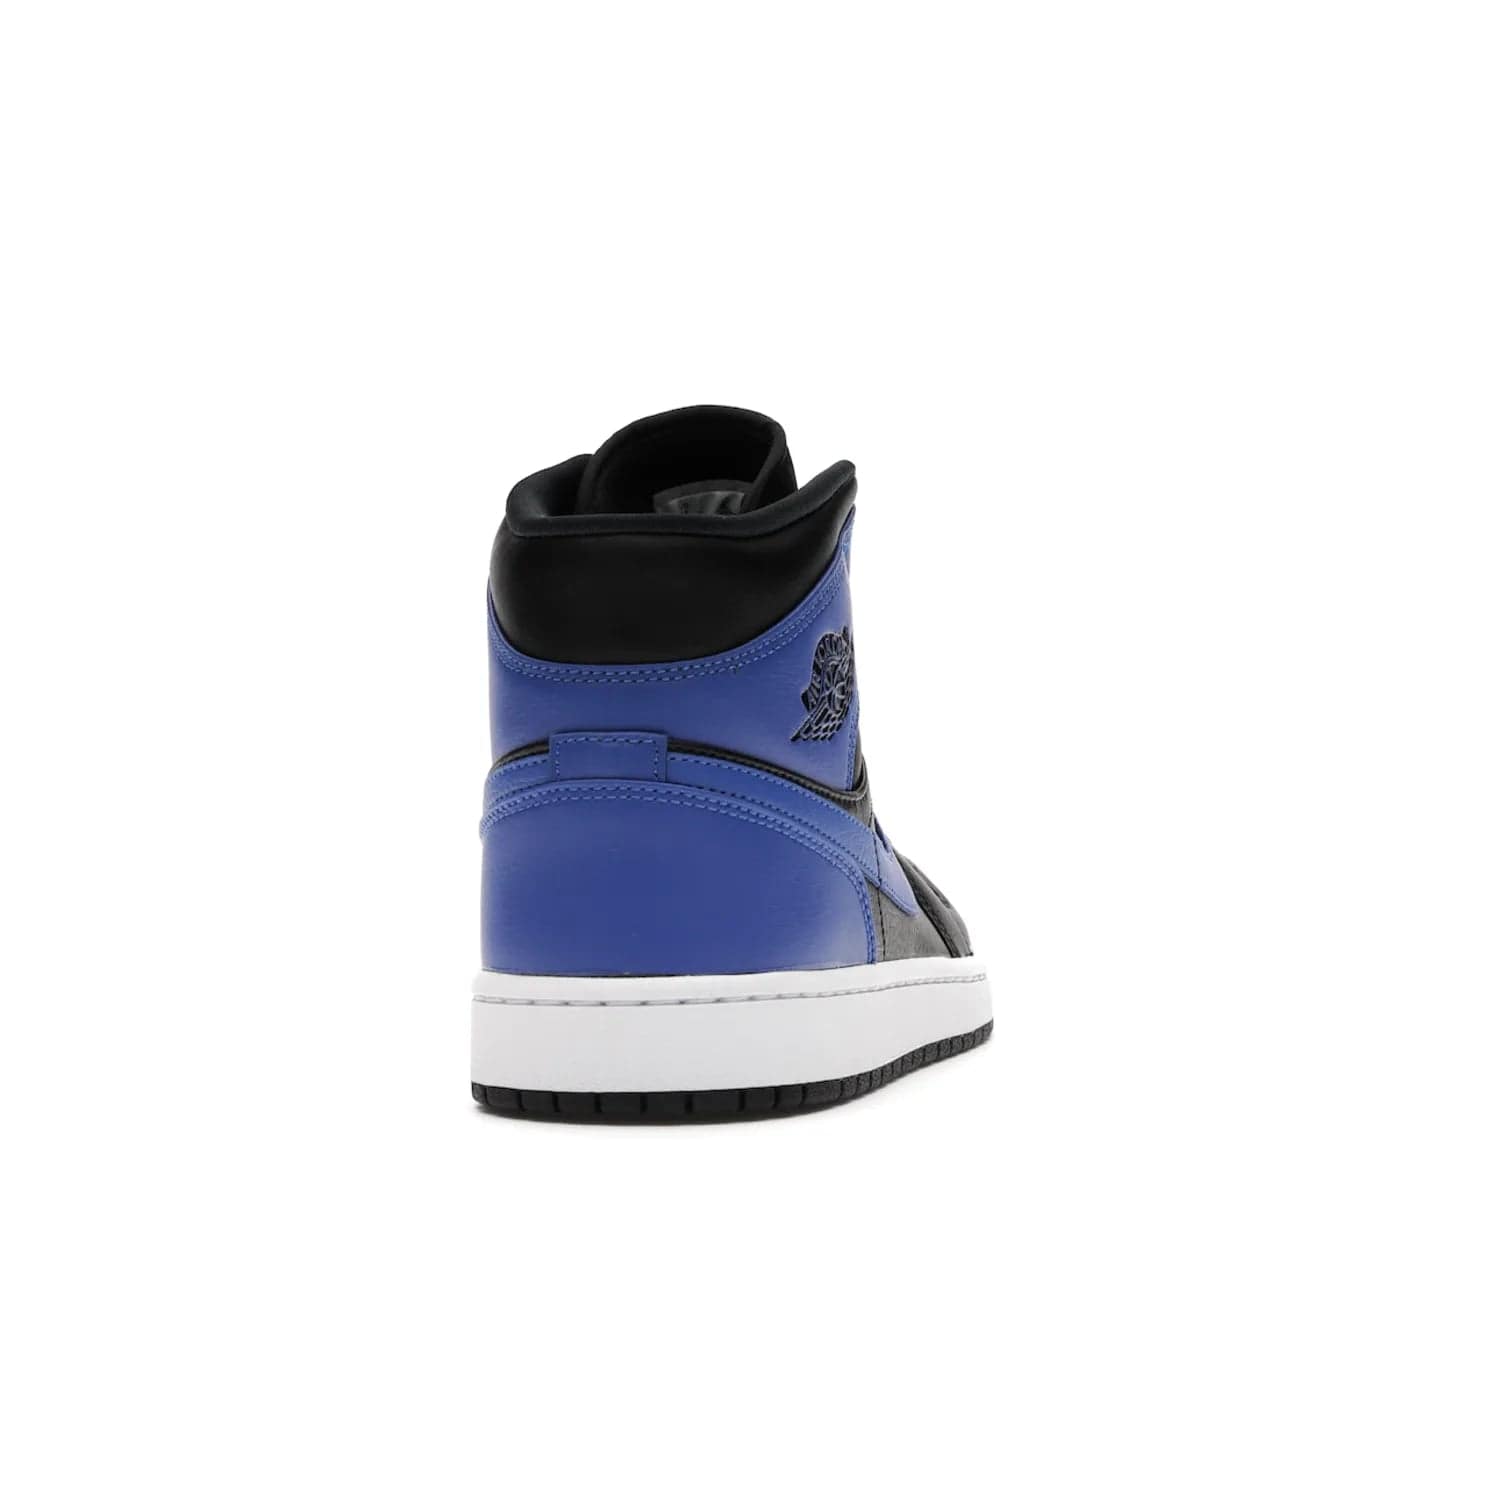 Jordan 1 Mid Hyper Royal Tumbled Leather - Image 29 - Only at www.BallersClubKickz.com - Iconic colorway of the Air Jordan 1 Mid Black Royal Tumbled Leather. Features a black tumbled leather upper, royal blue leather overlays, white midsole & black rubber outsole. Released December 2020. Adds premium style to any collection.